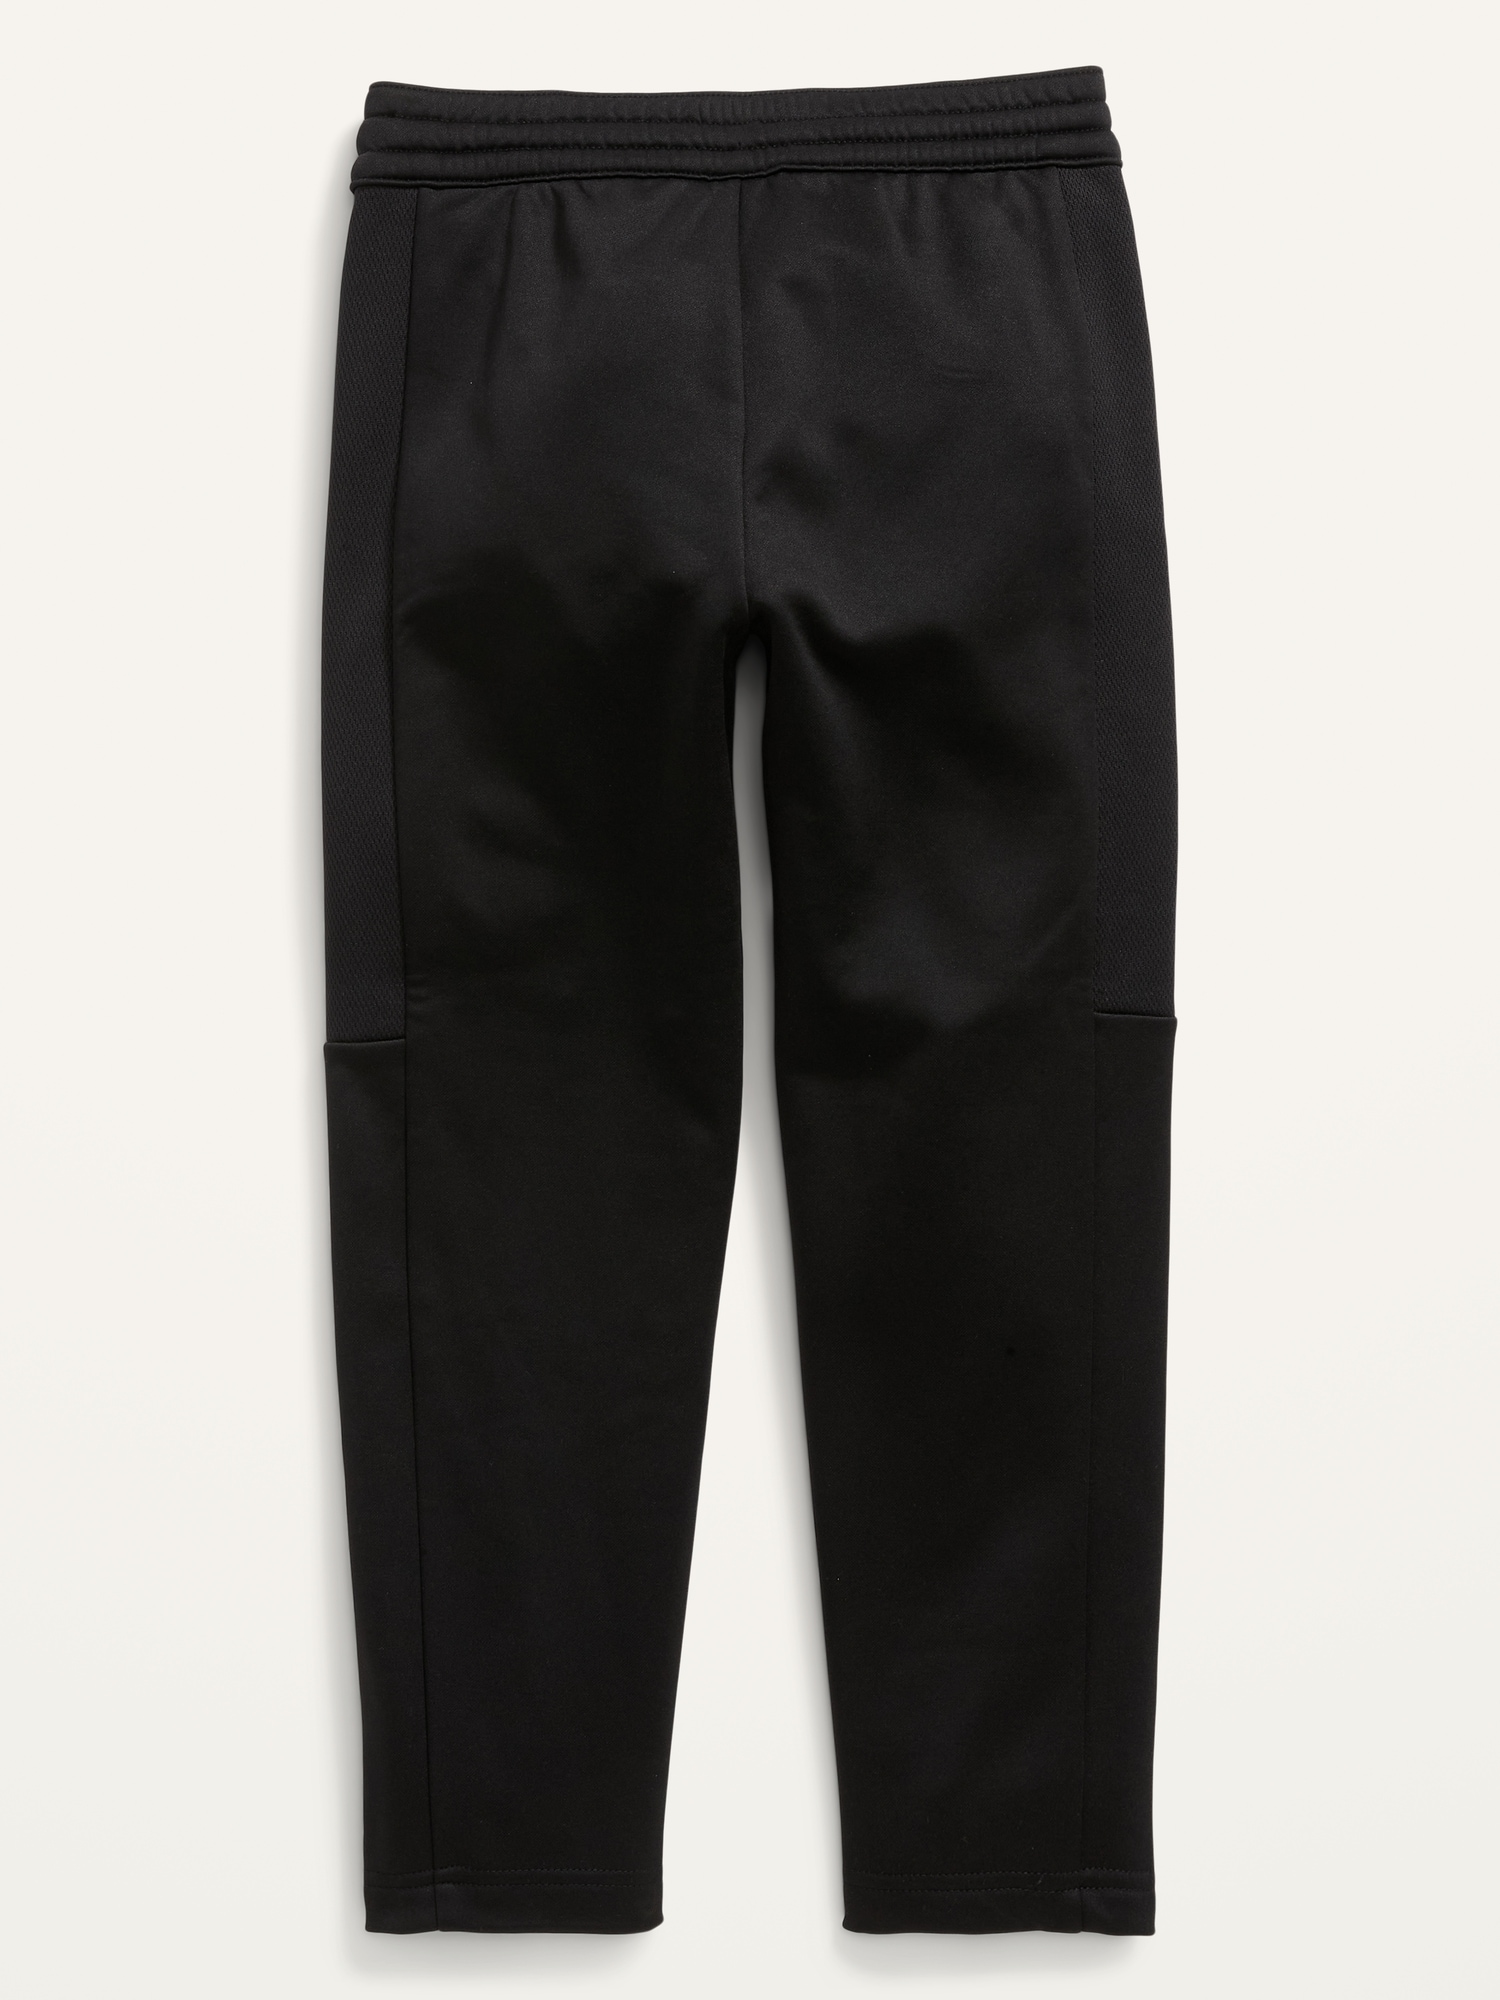 Techie Fleece Tapered Sweatpants for Boys | Old Navy